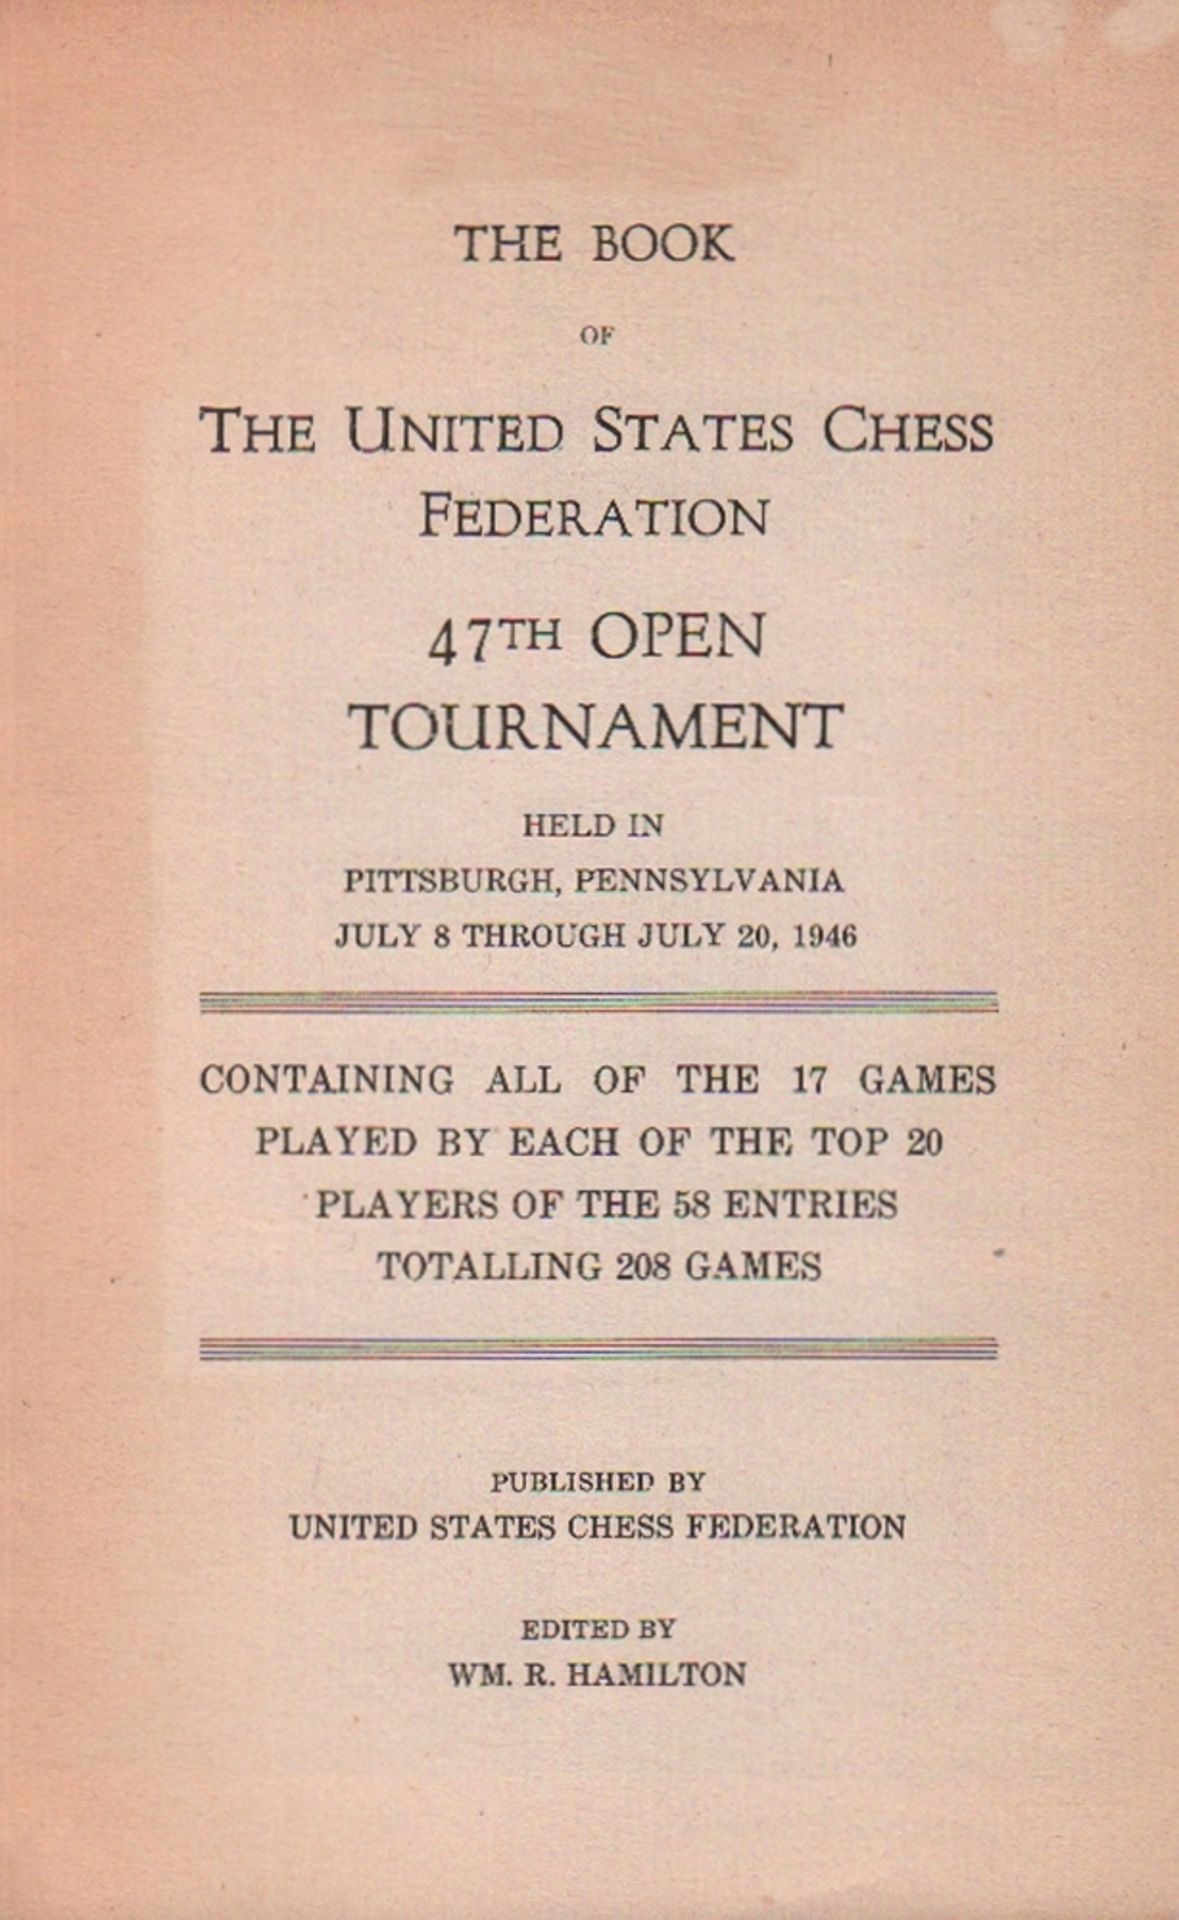 Pittsburgh 1946. Hamilton, William R. (Hrsg.) The Book of The United States Chess Federation 47th